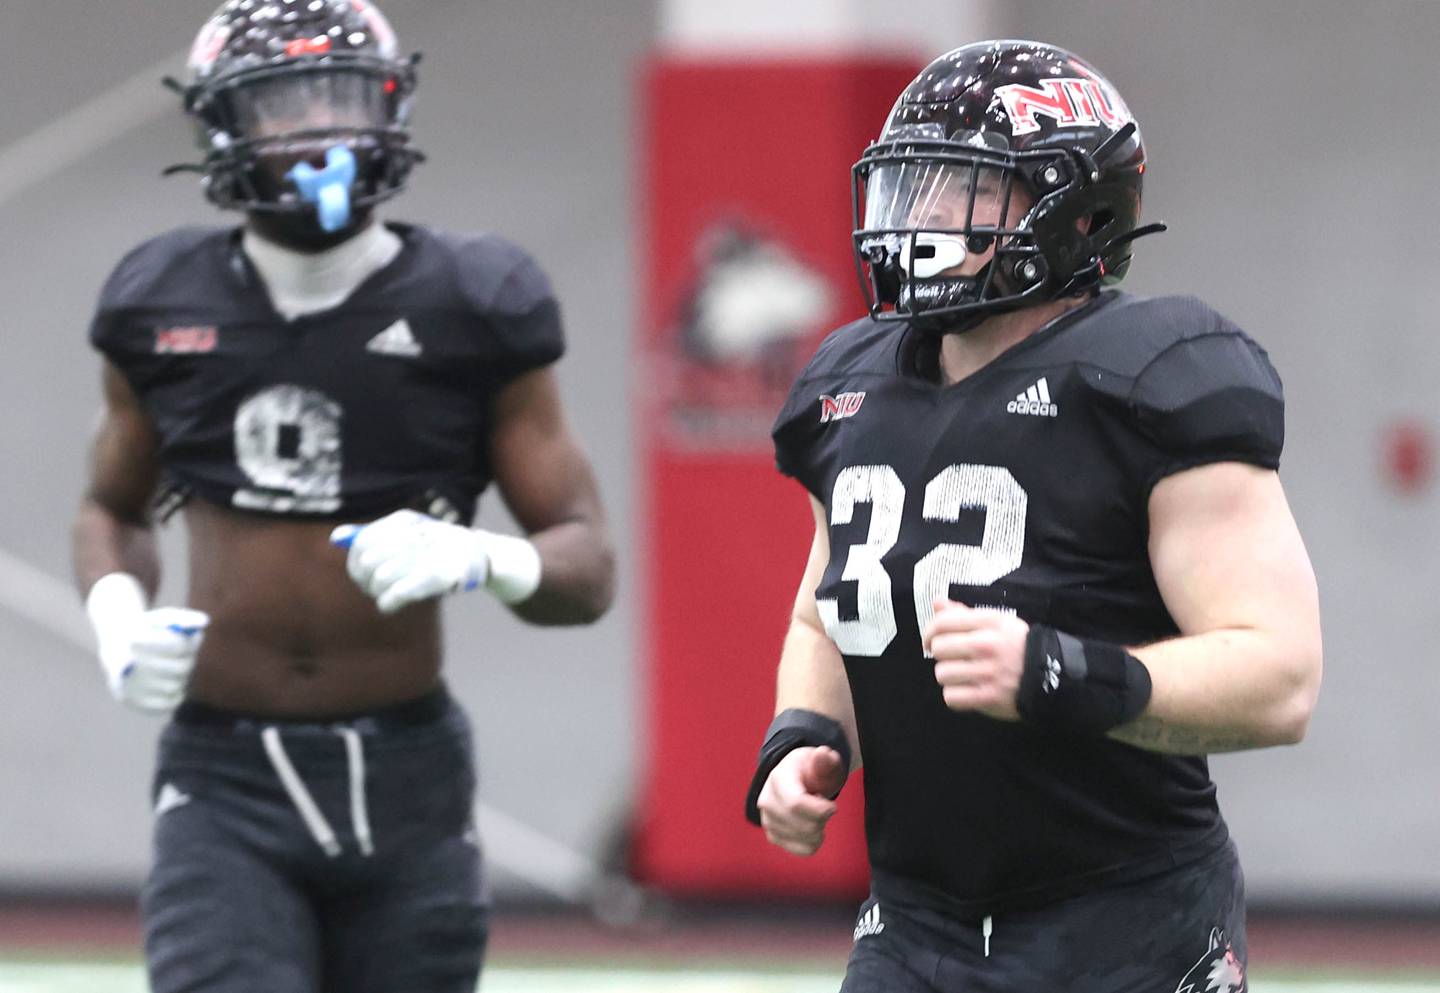 Northern Illinois University linebacker Quinn Urwiler (right) runs on the field Wednesday, March 30, 2022, during spring practice in the Chessick Practice Center at NIU in DeKalb.